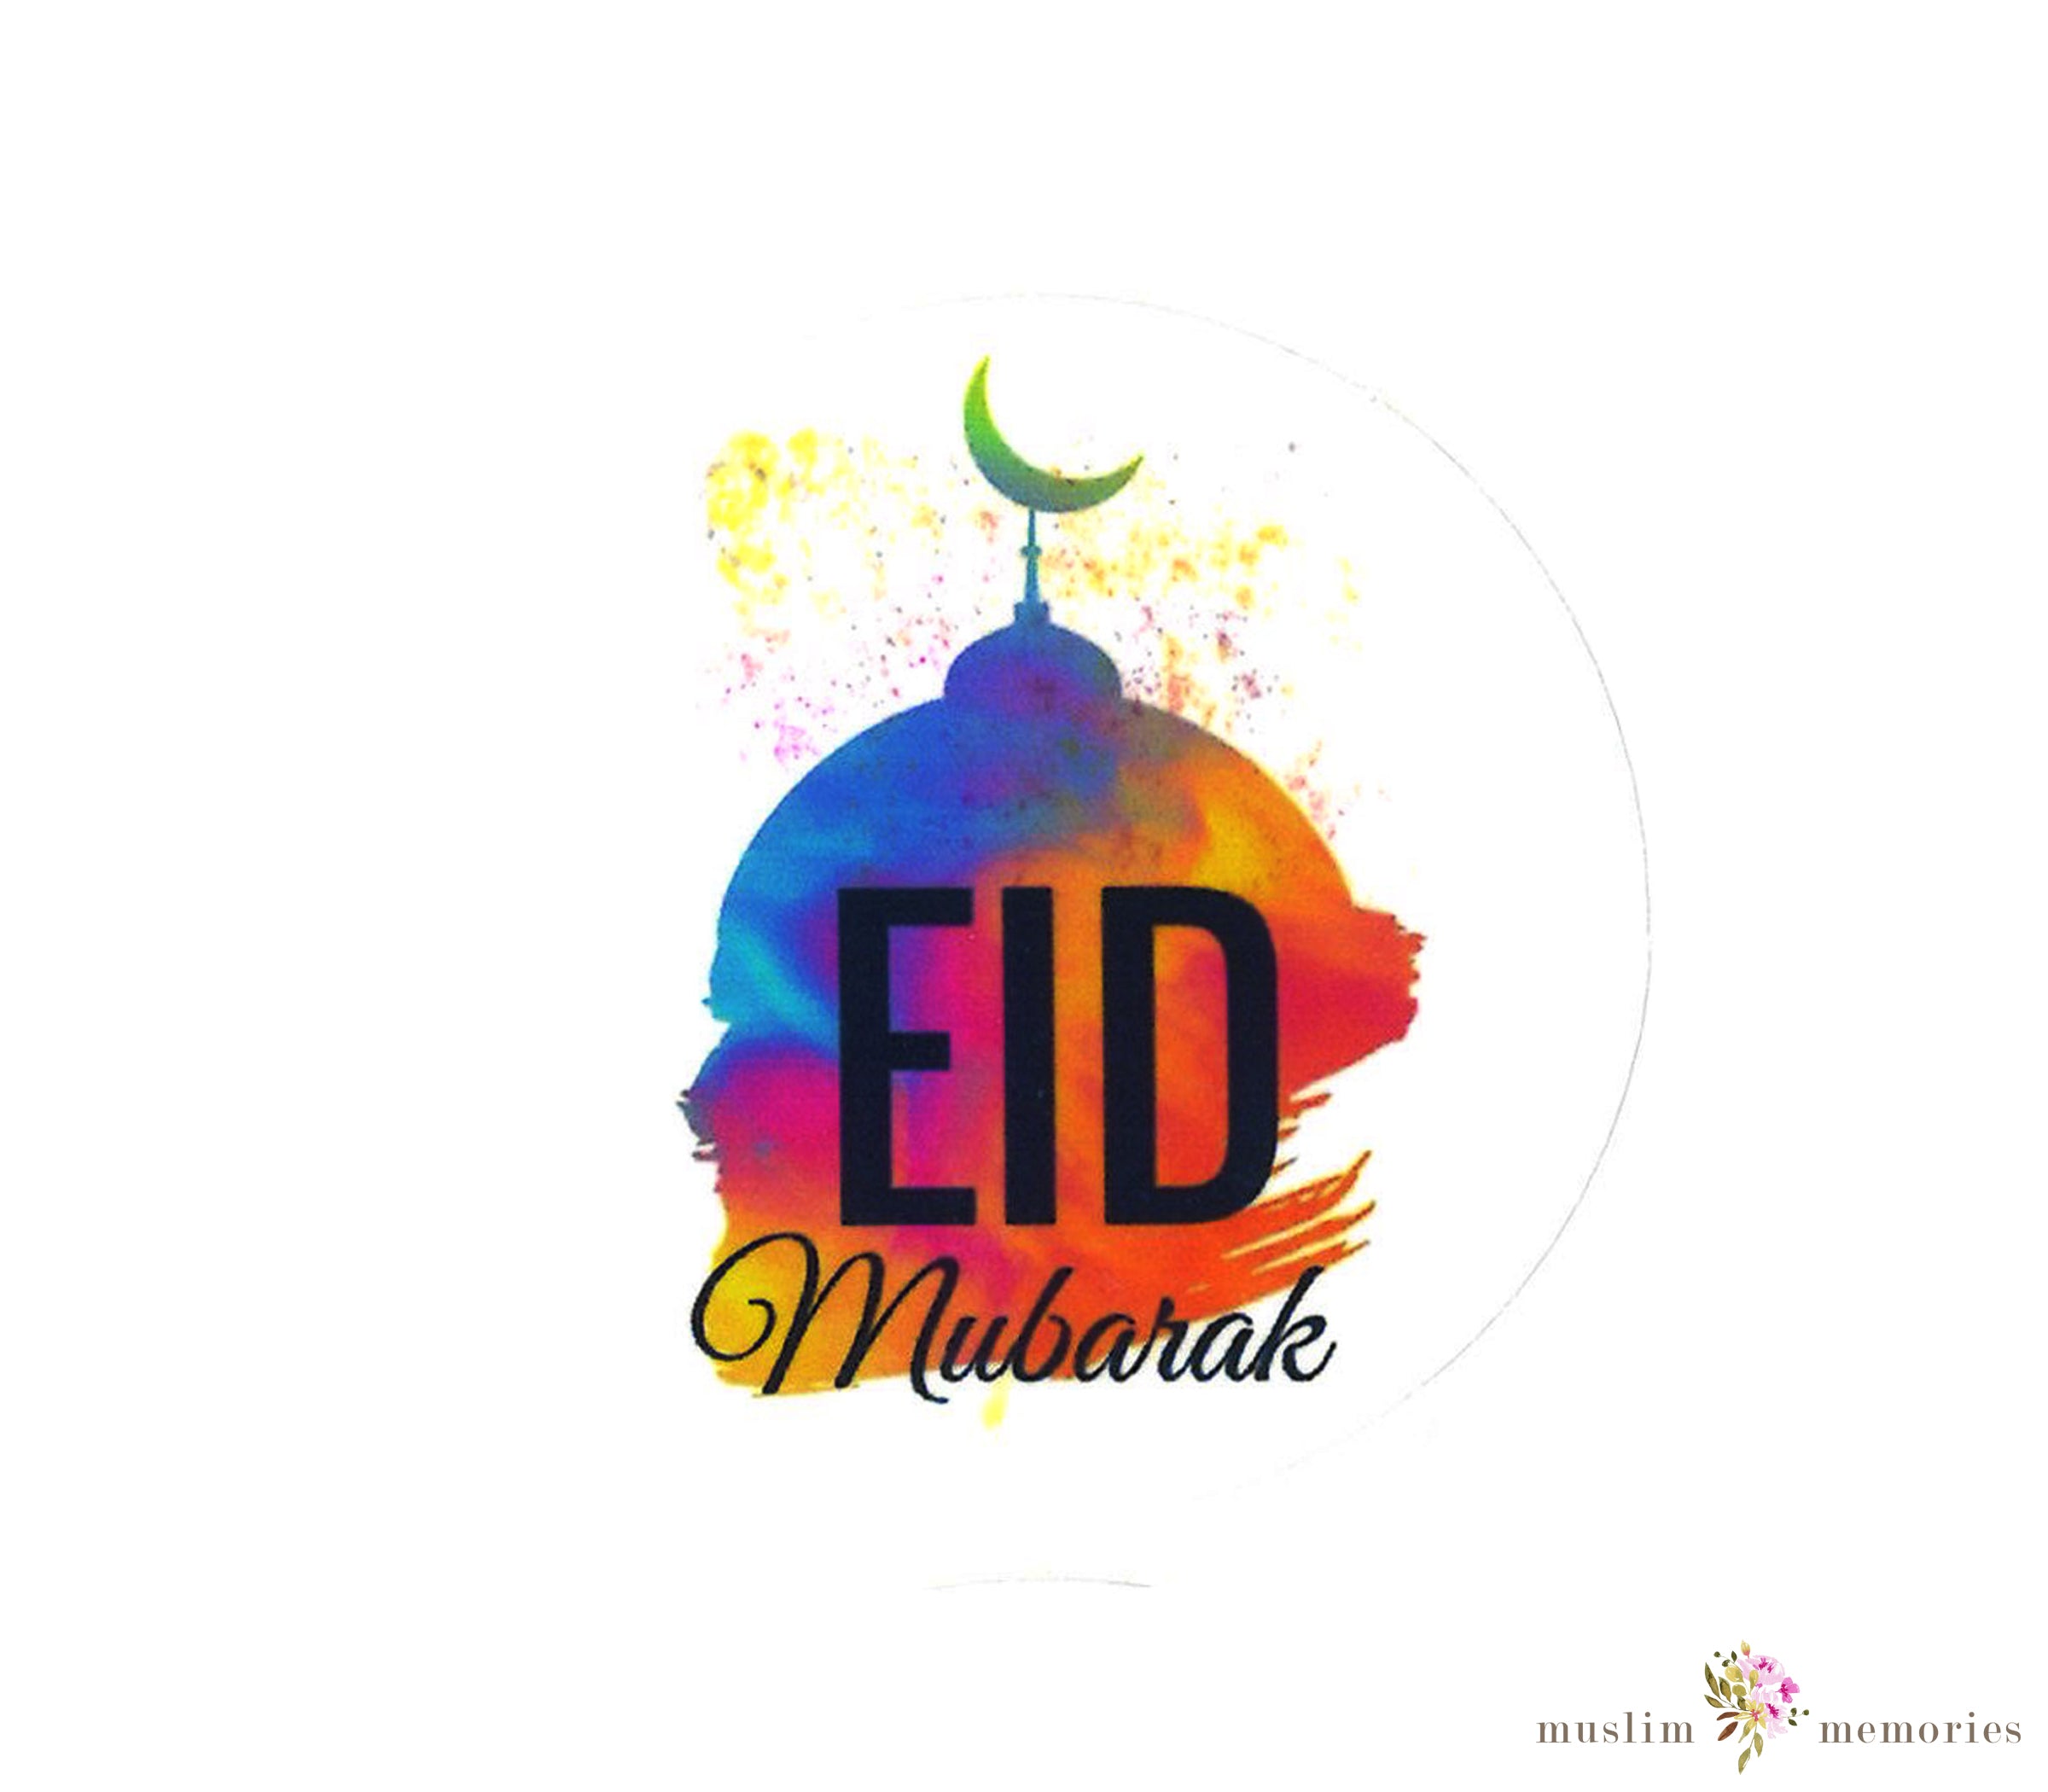 Arabic Eid Greeting Gold foil Stickers Set of 12 - Eidway Store